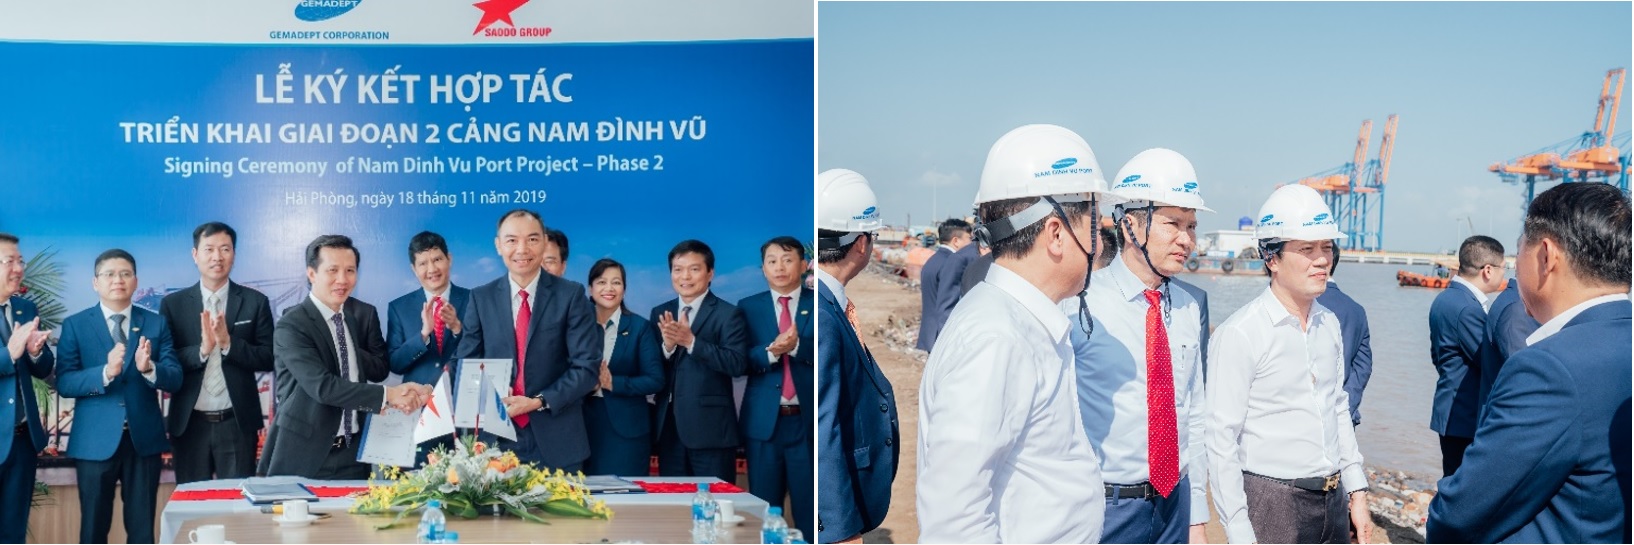 Signing ceremony for the phase 2 between Sao Do Group and Gemadept Corporation in 2019 1